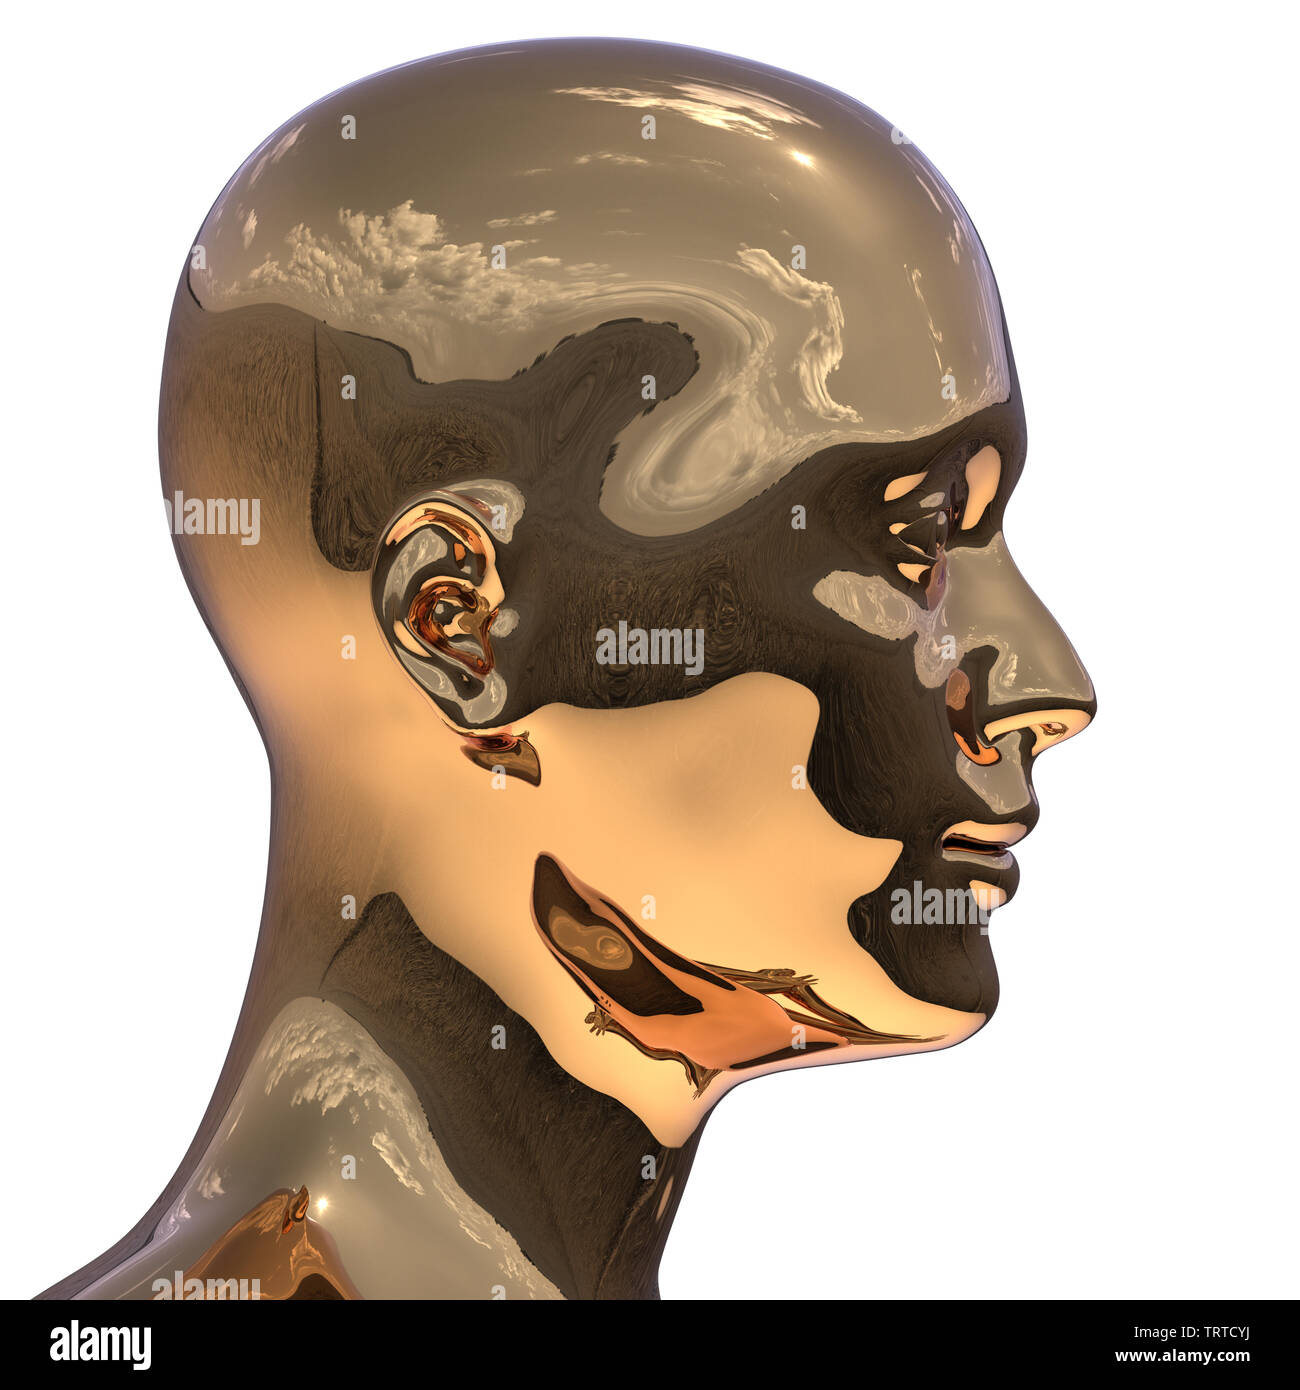 Golden man head silhouette stylized metallic polished. Human profile creativity icon concept. 3d illustration, isolated Stock Photo